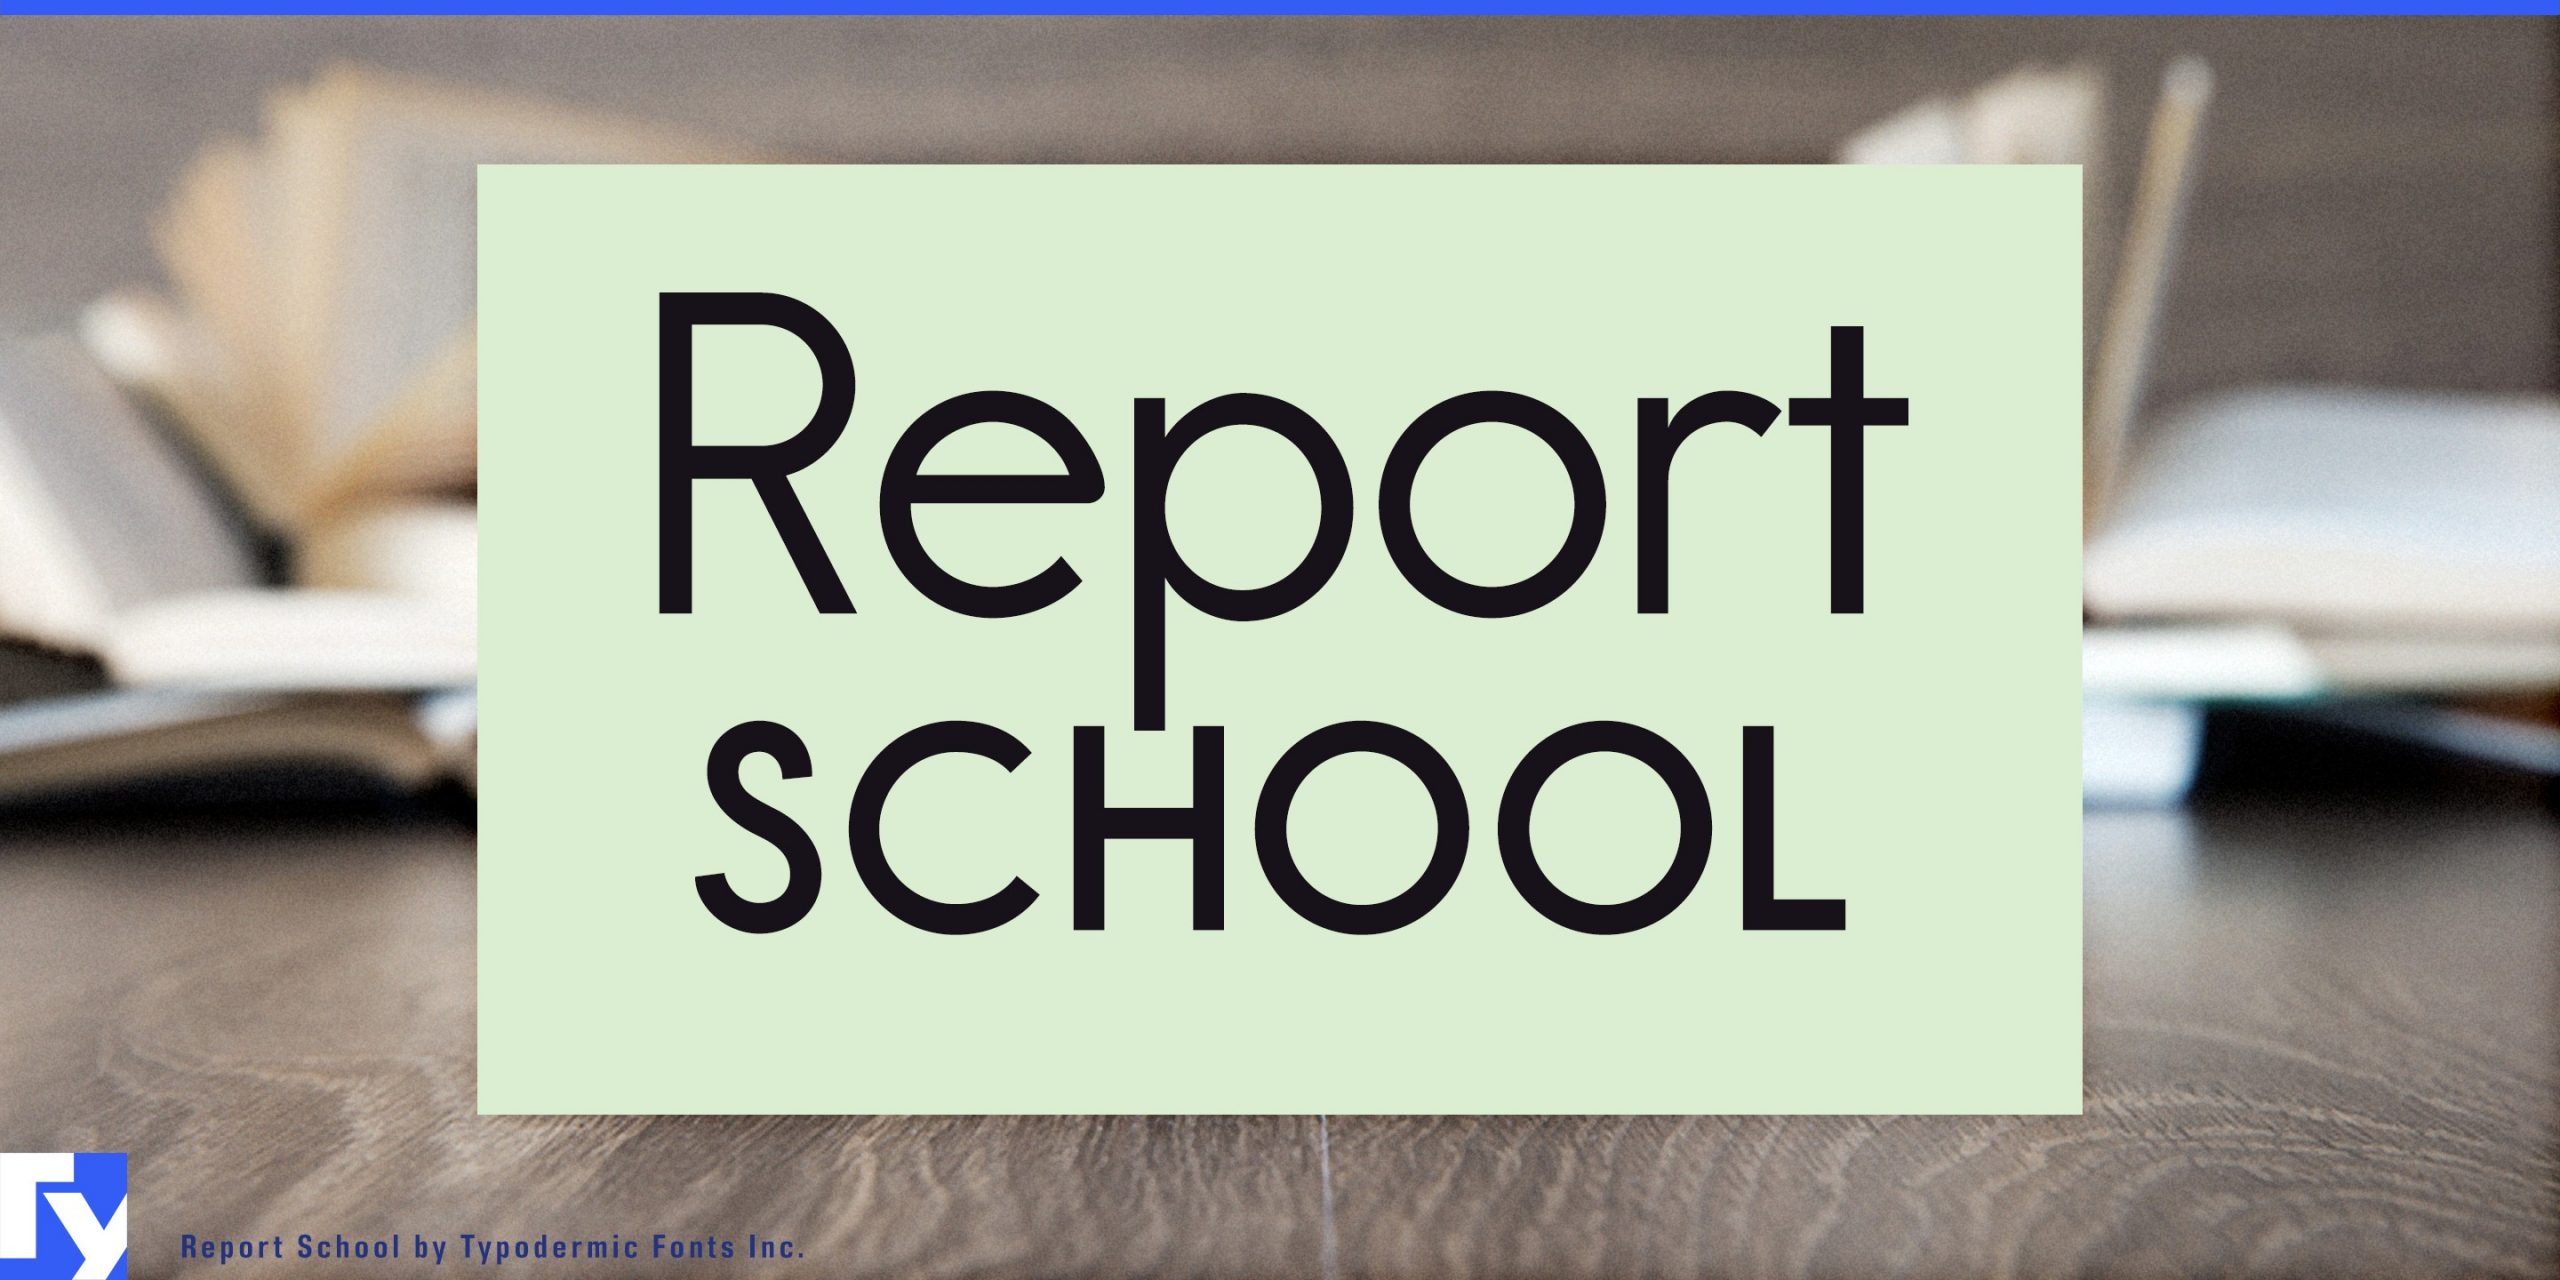 Enhance readability with Report School: Prioritizing legible letterforms